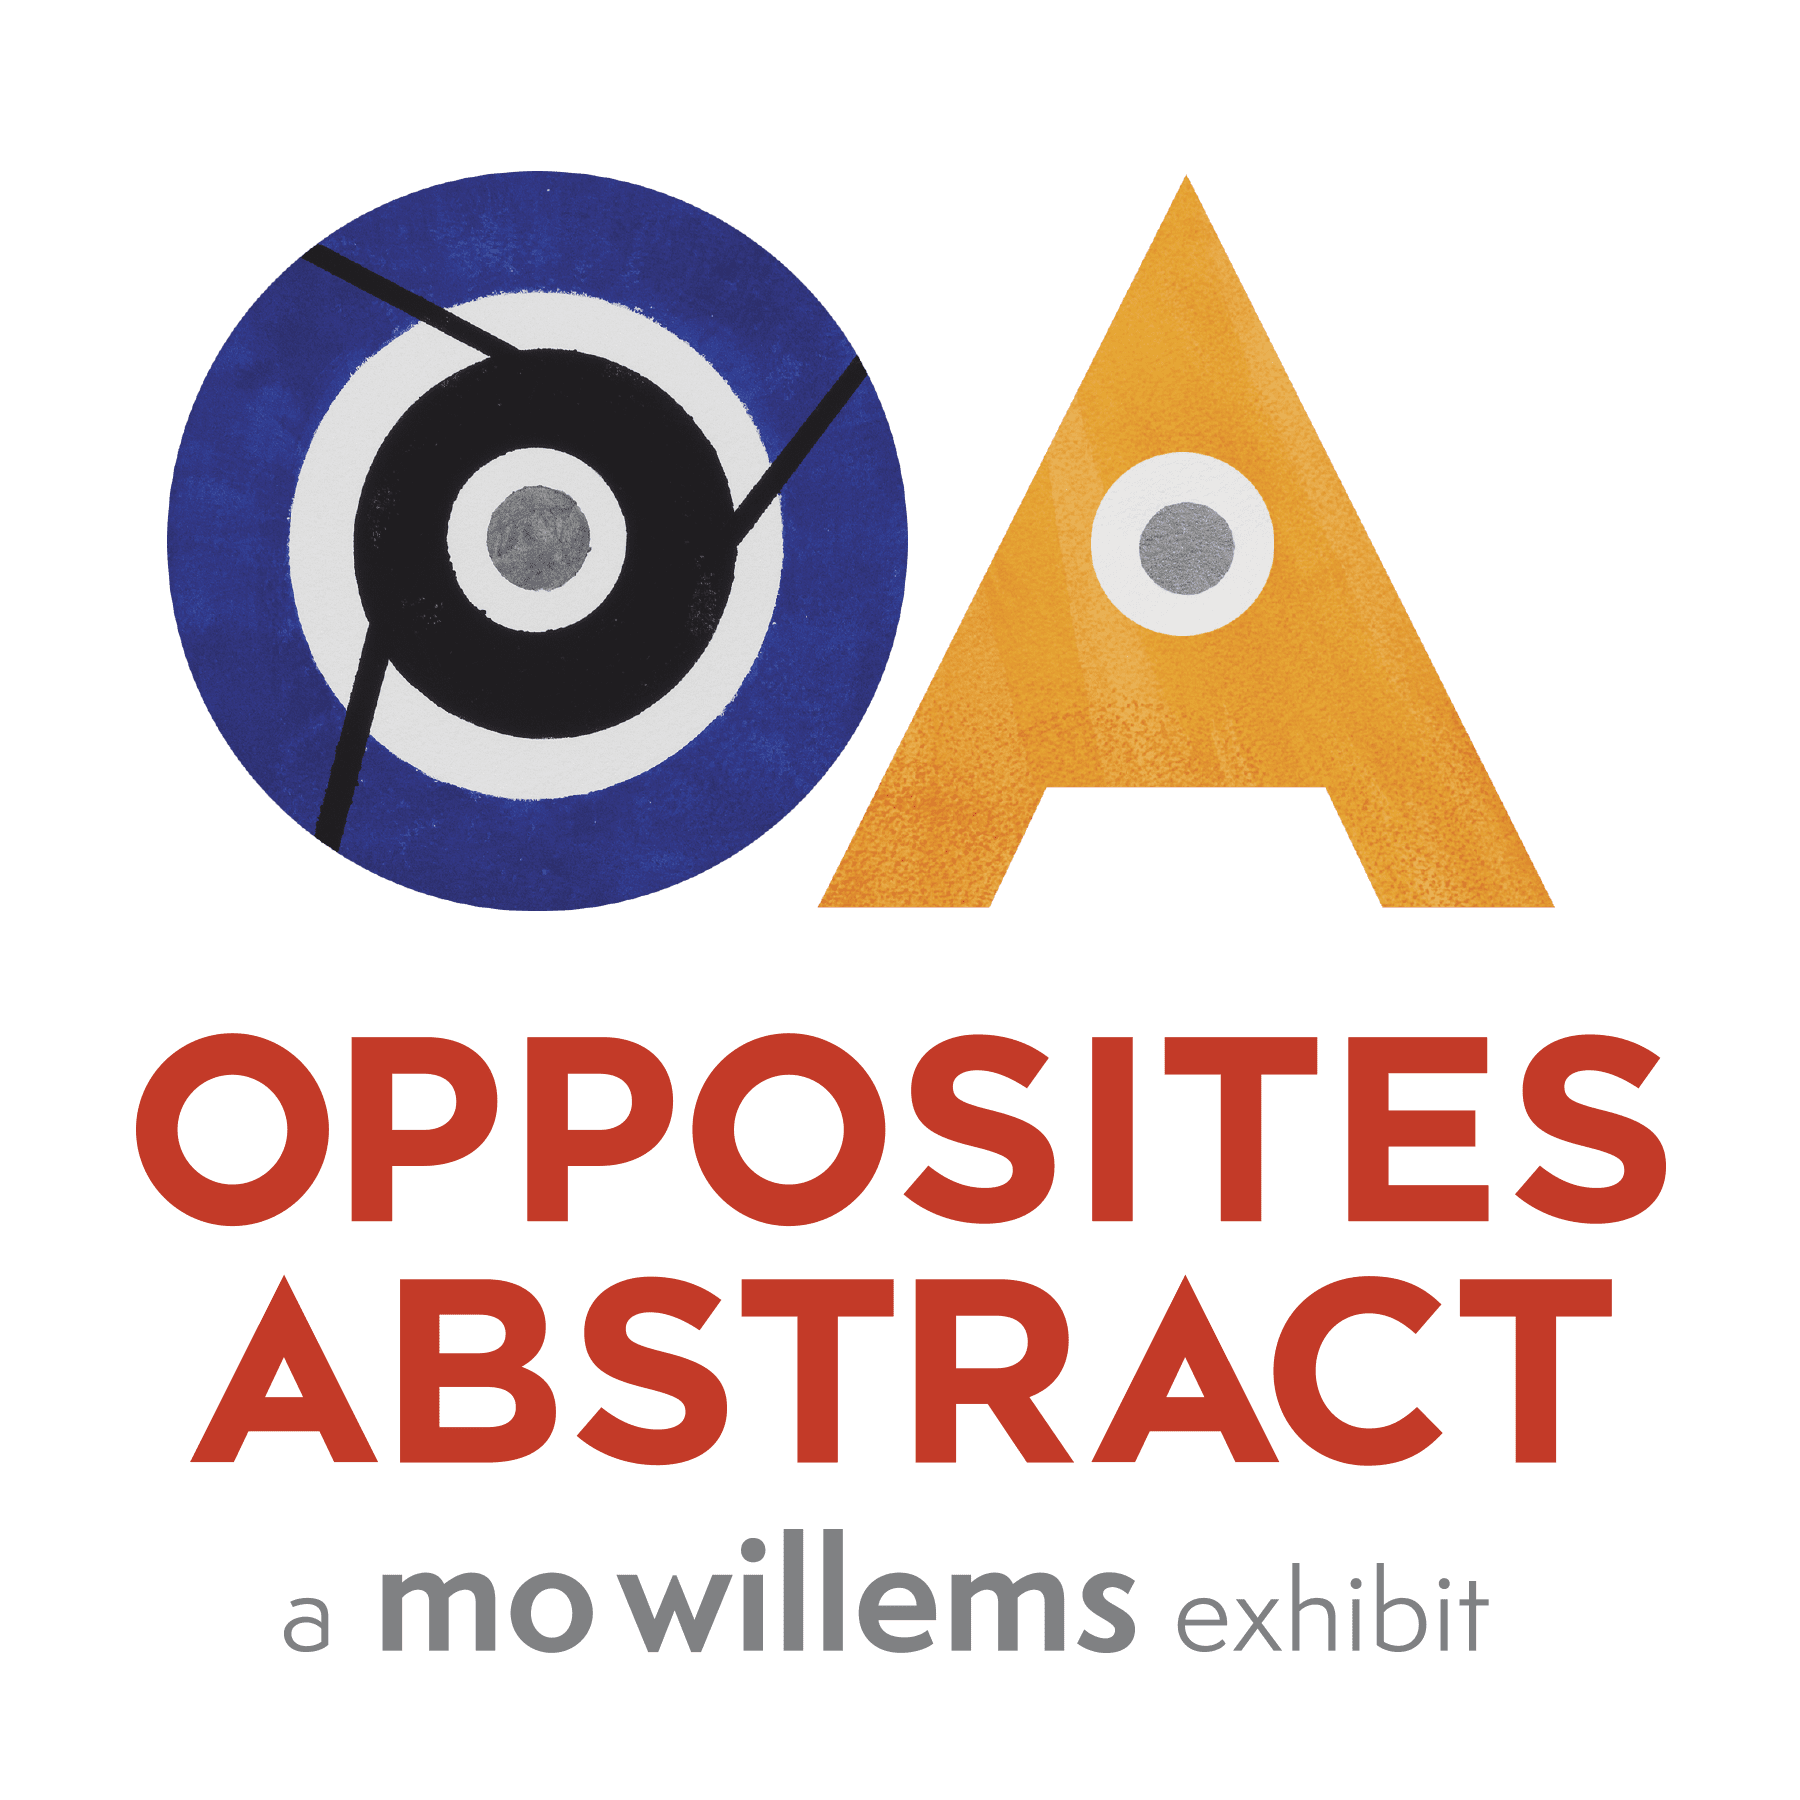 Logo for opposites abstract exhibit